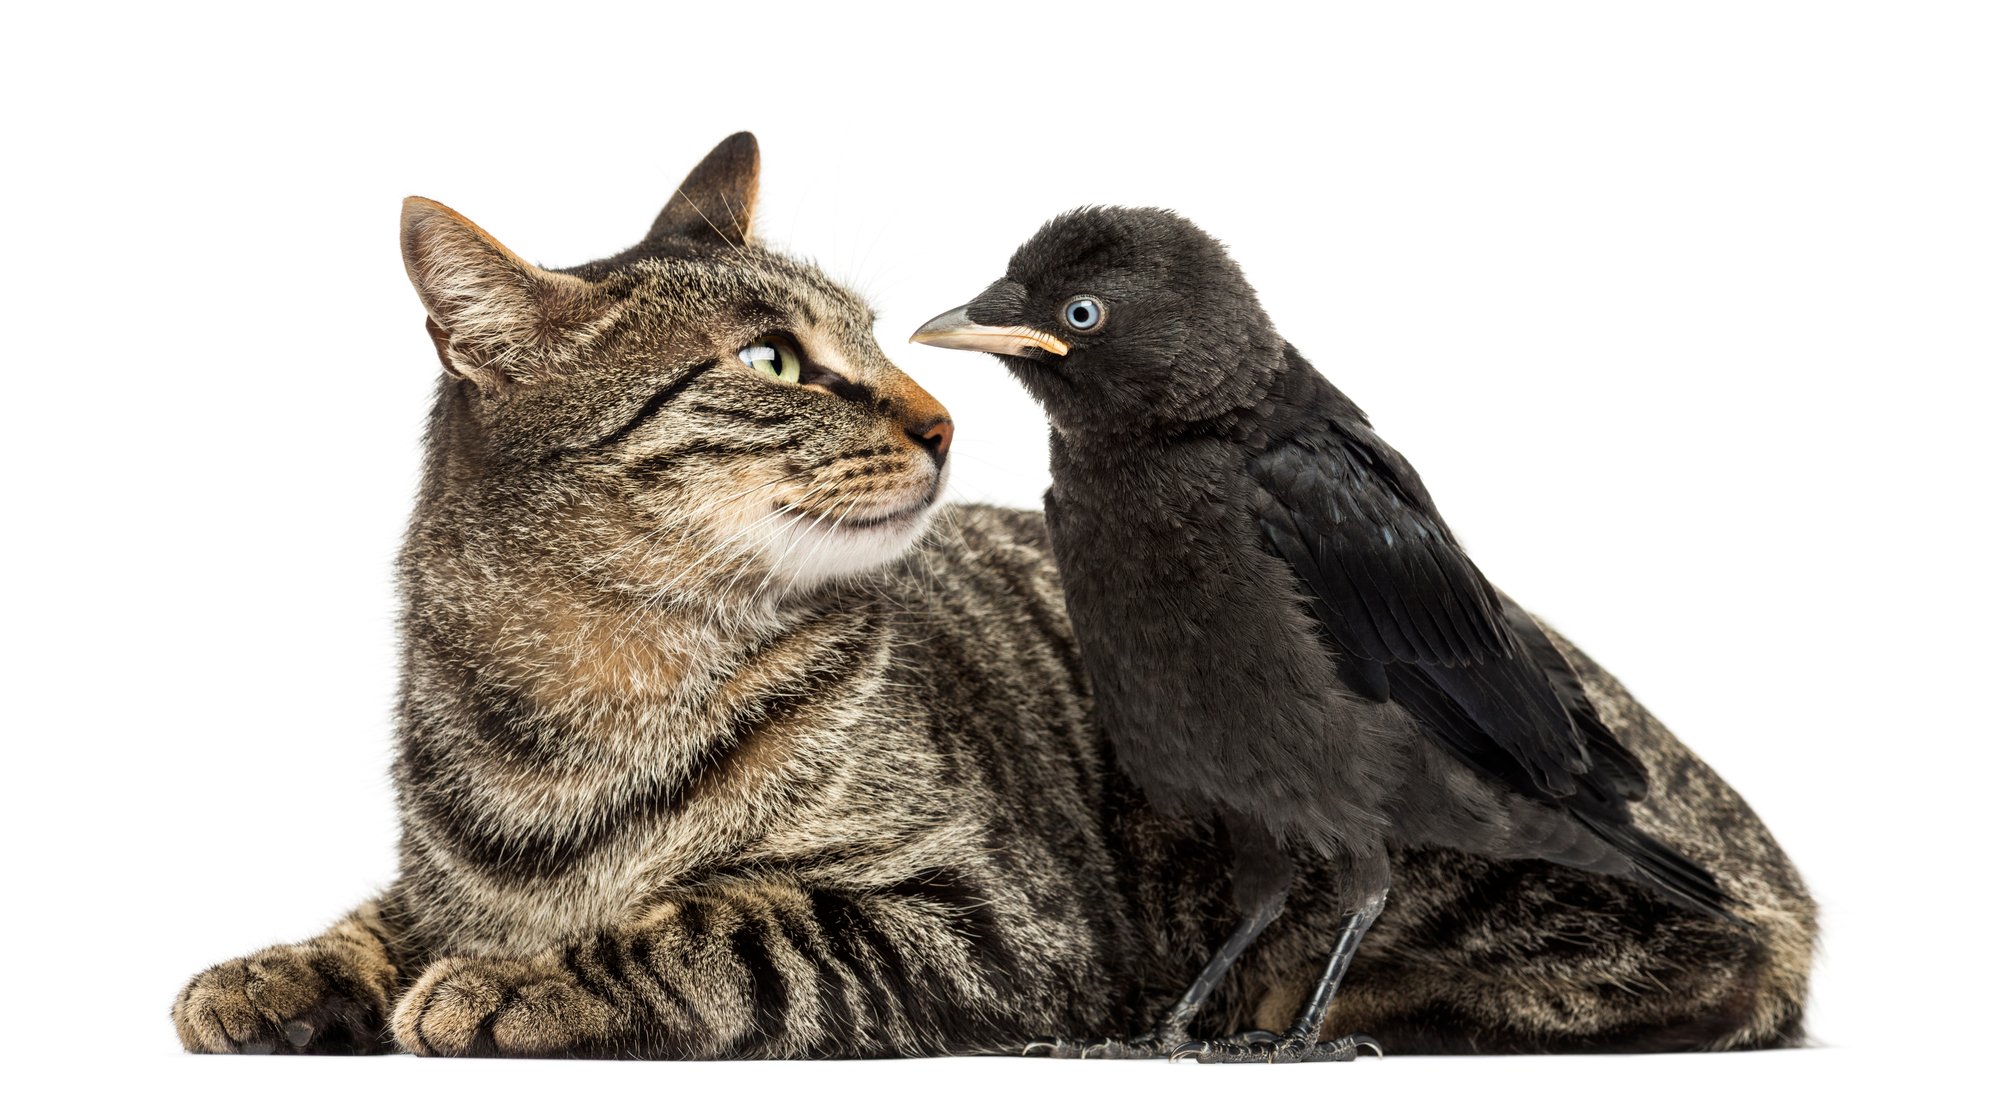 Western Jackdaw and cat looking at each other, isolated on white